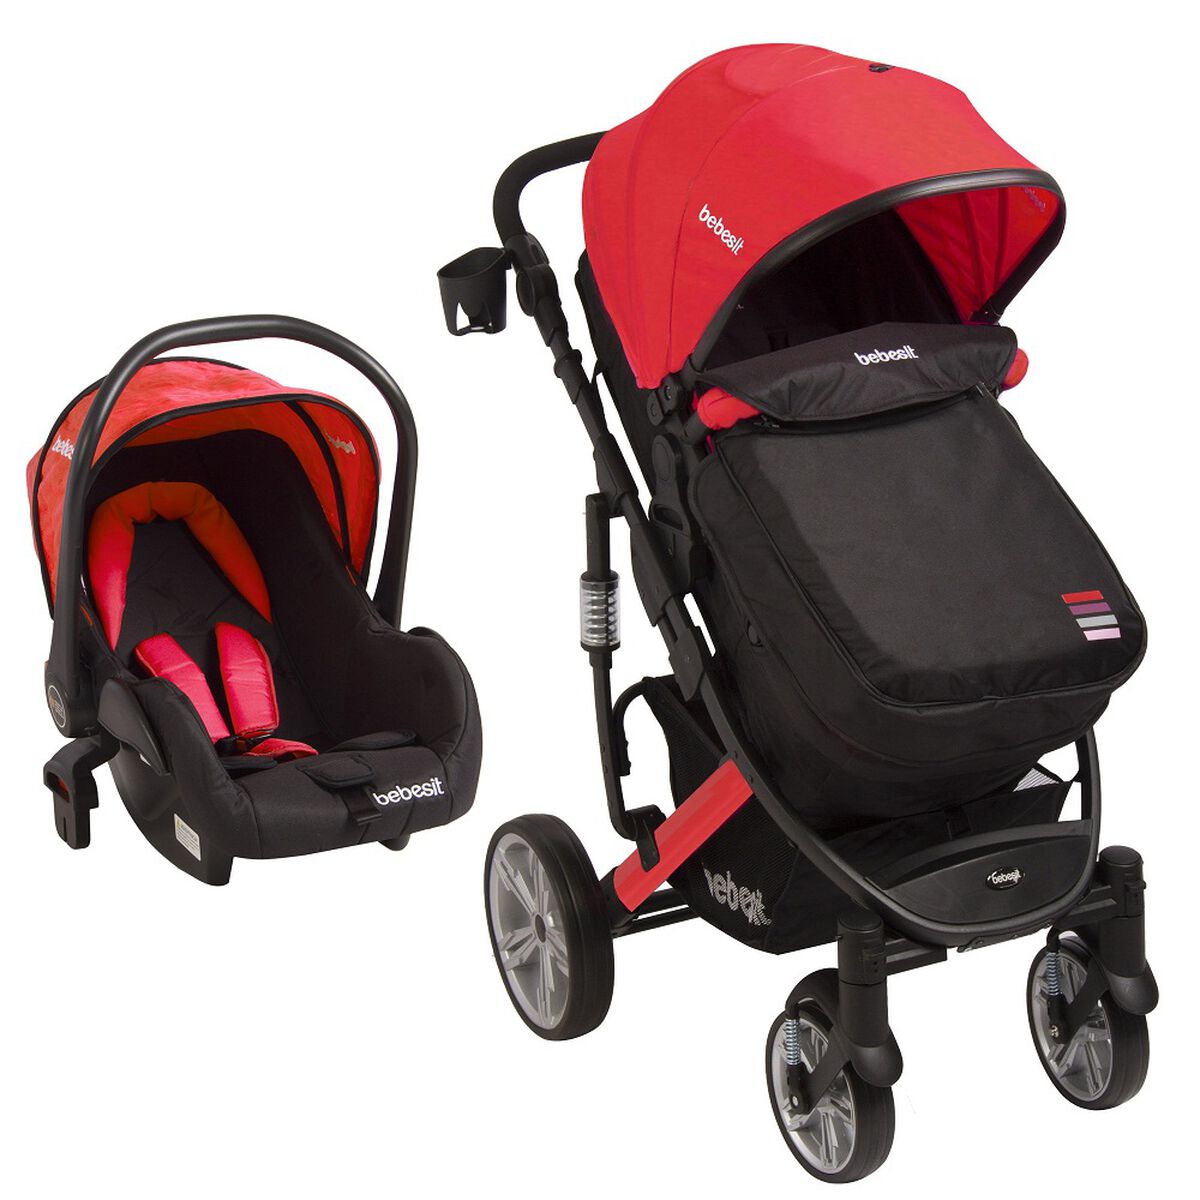 Coche Travel System Bebesit Quest